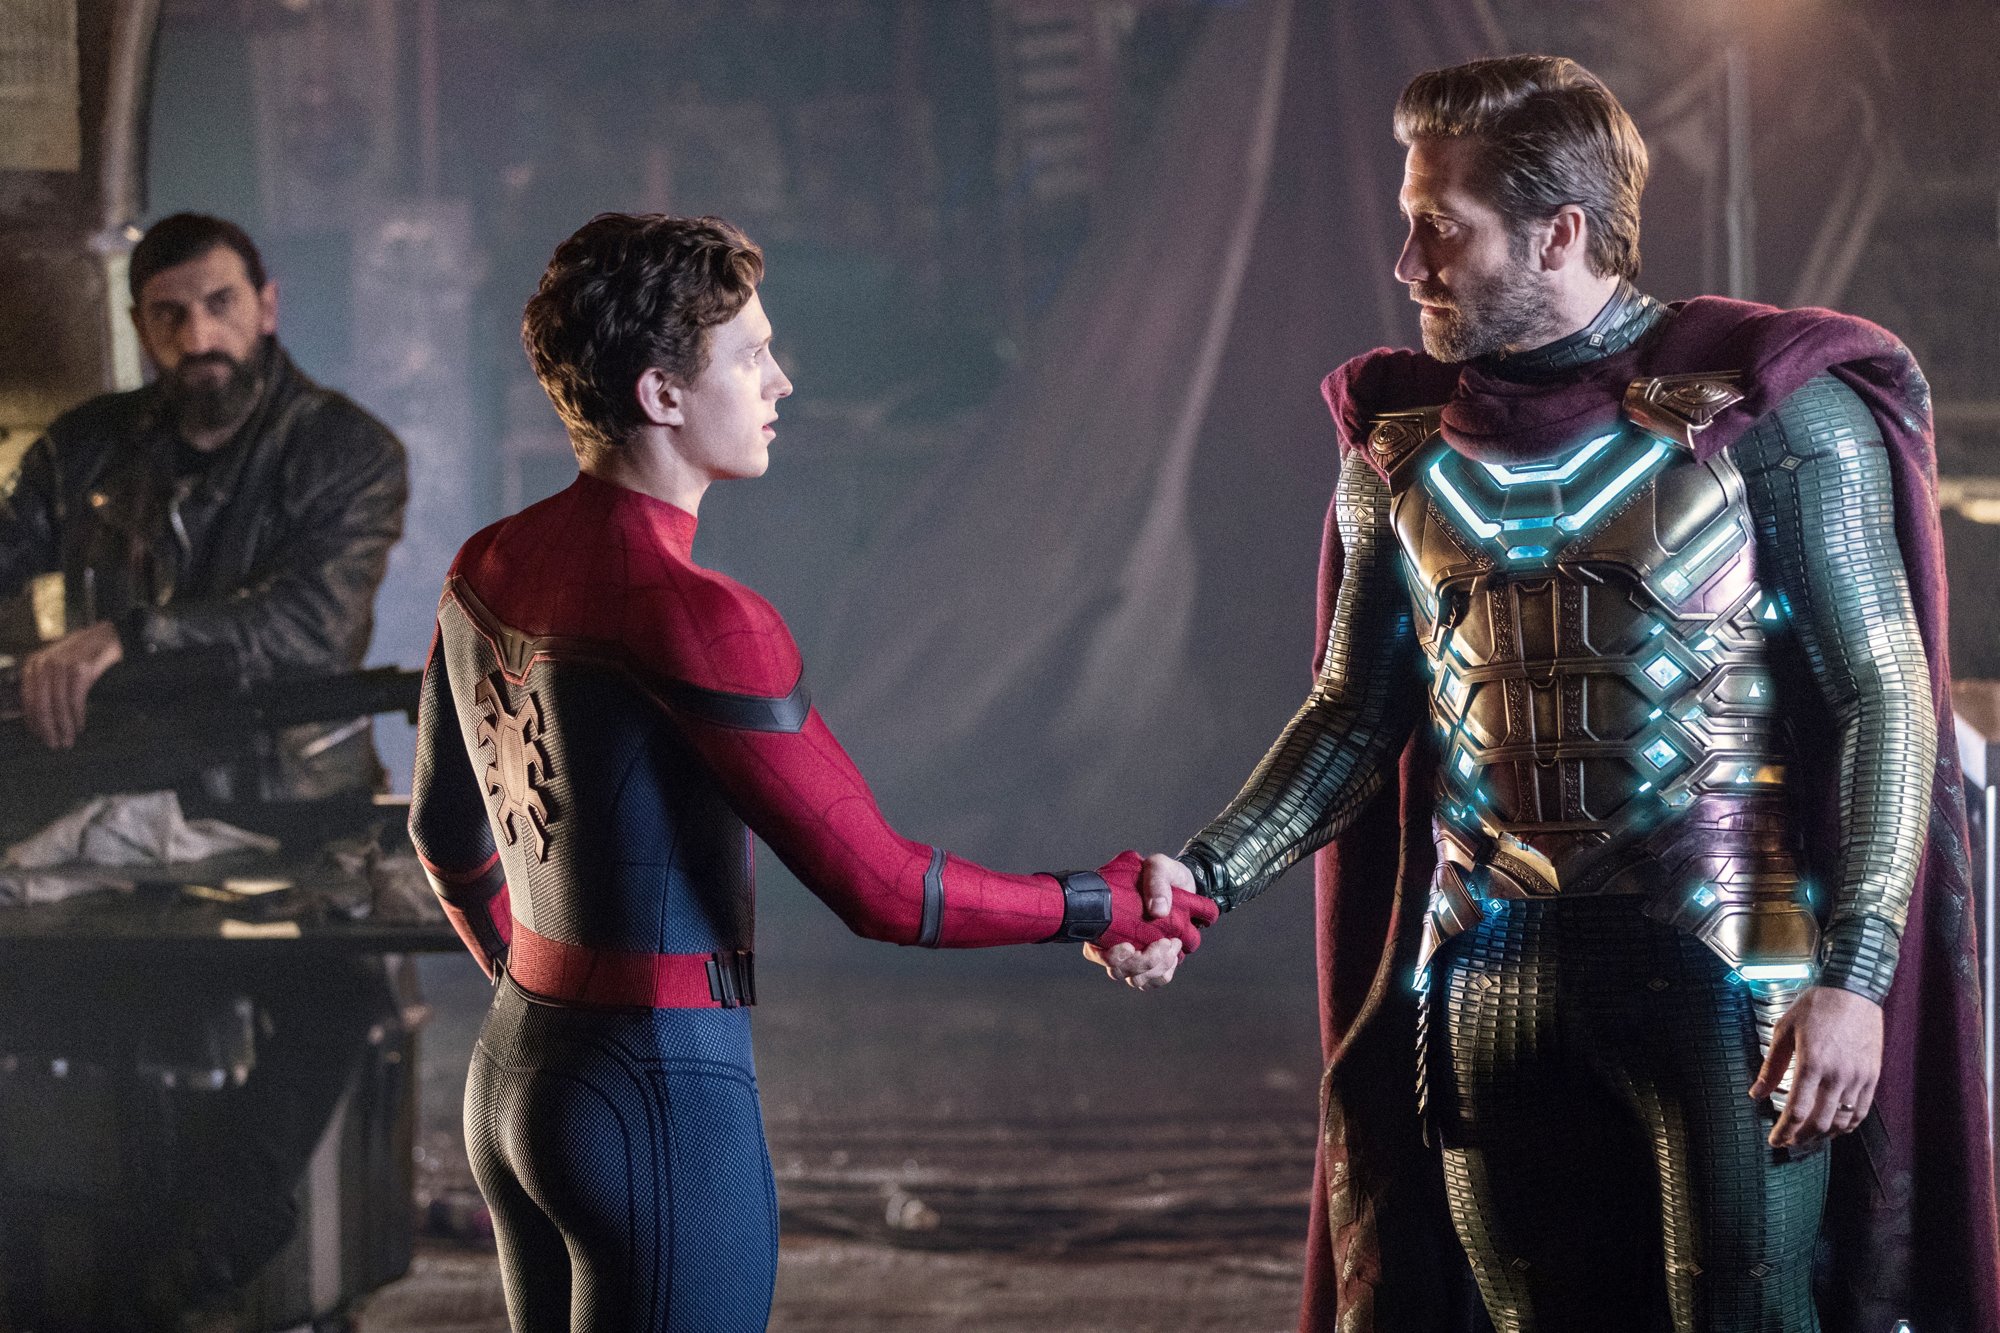 Tom Holland stars as Peter Parker/Spider-Man and Jake Gyllenhaal stars as Quentin Beck/Mysterio in Sony Pictures' Spider-Man: Far From Home (2019)